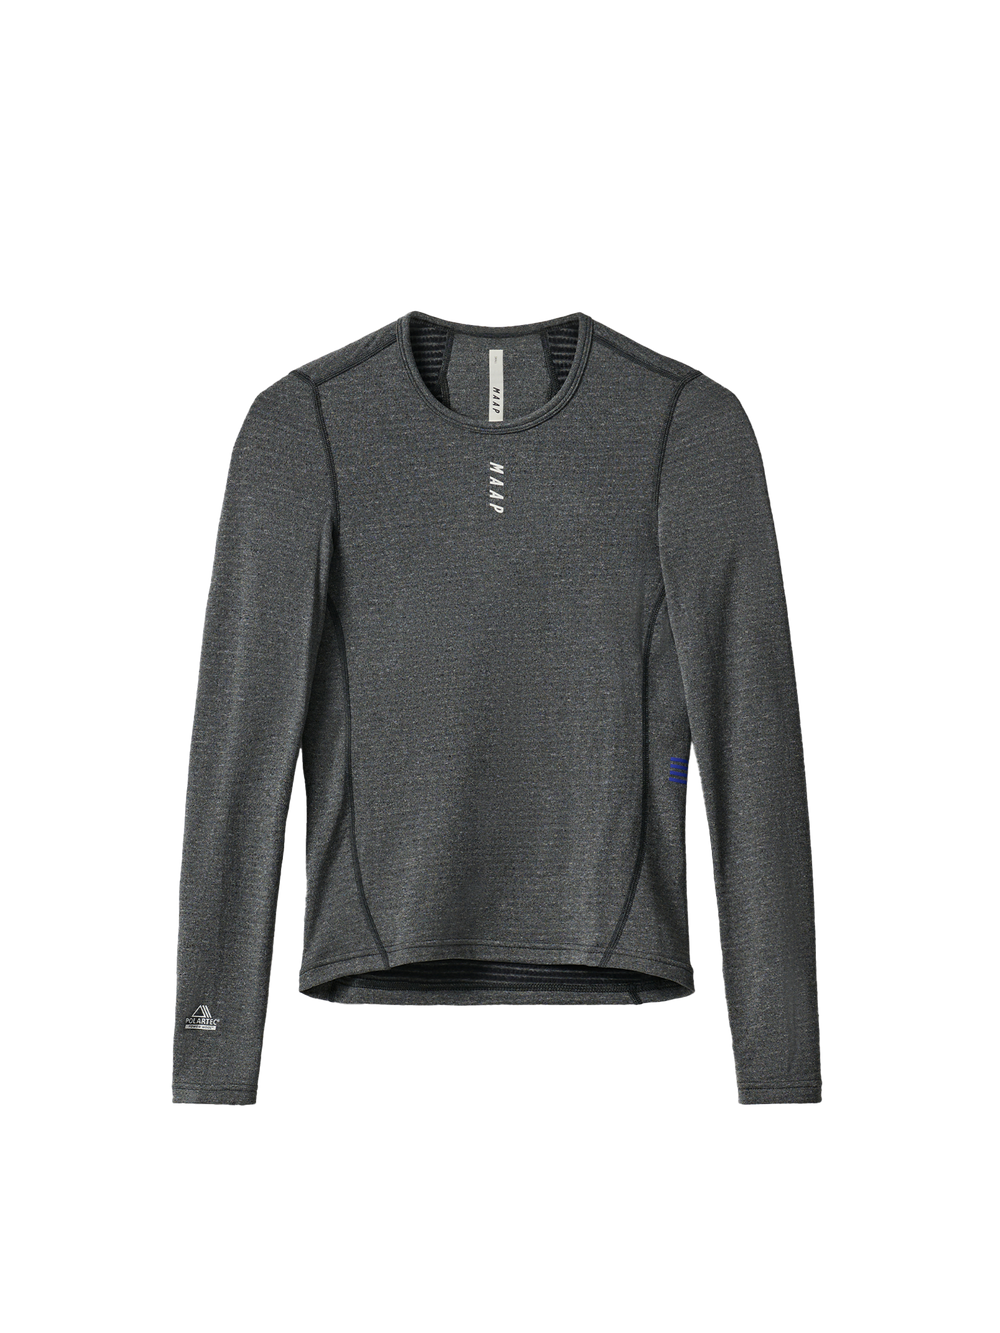 Product Image for Deep Winter Base Layer